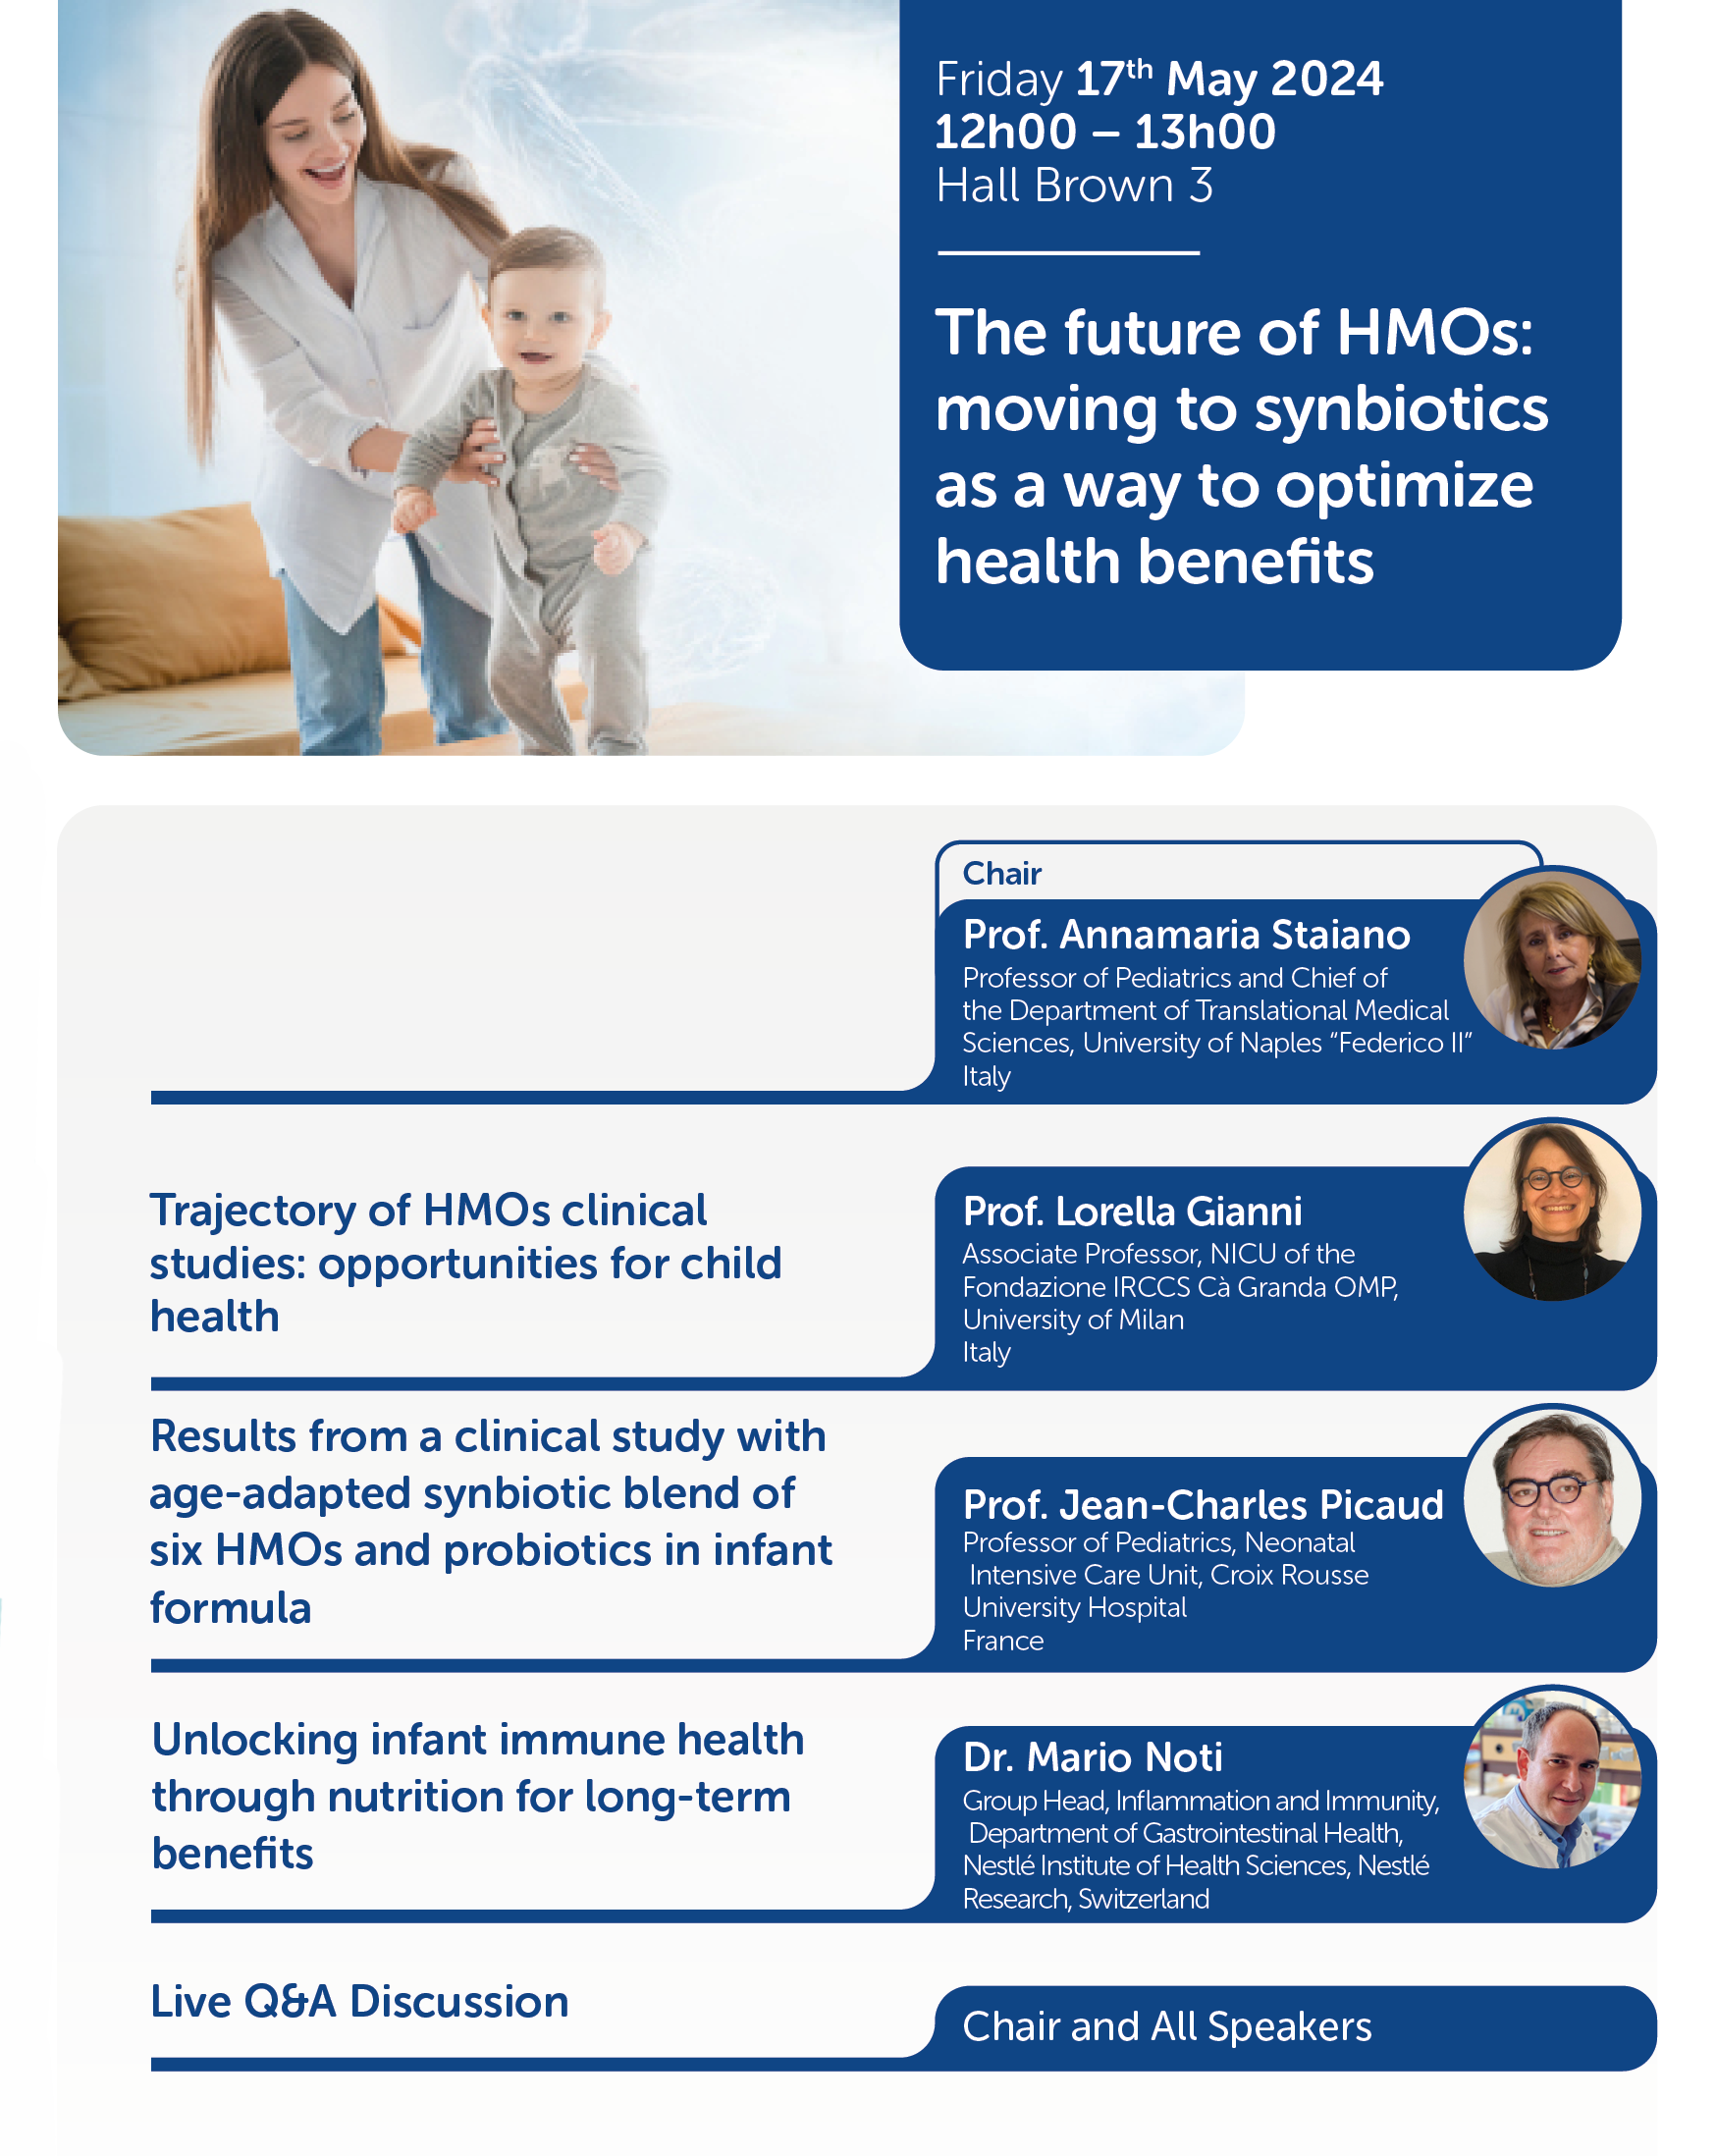 The future of HMOs moving to synbiotics as a way to optimize health benefits.png